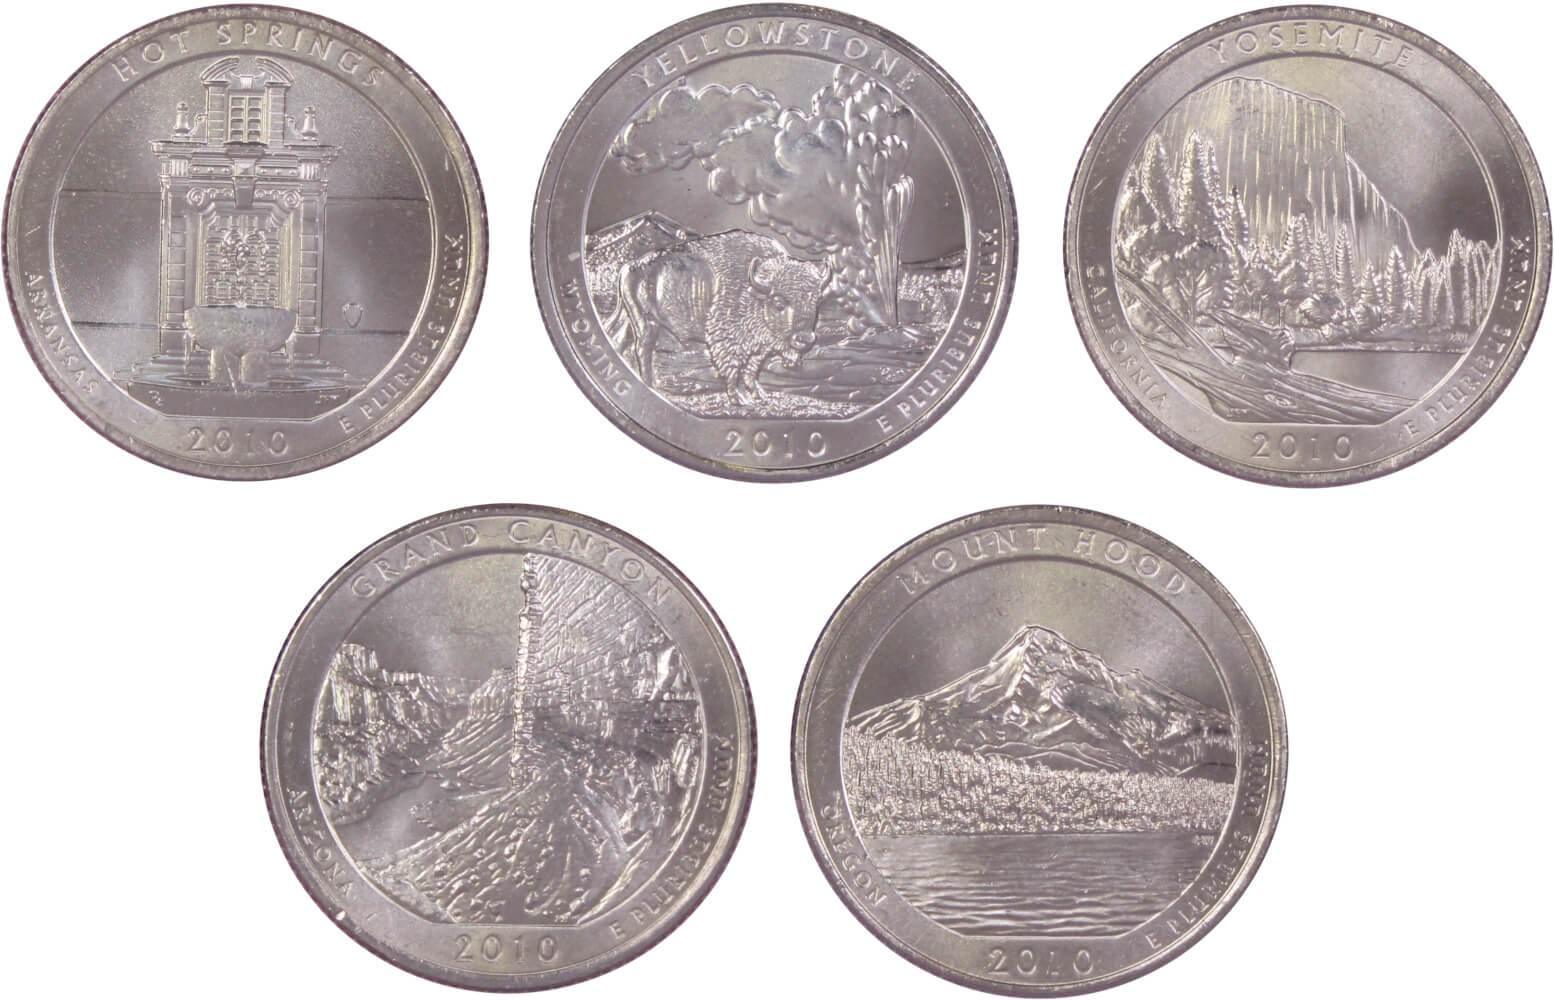 2010 P National Park Quarter 5 Coin Set Uncirculated Mint State 25c Collectible